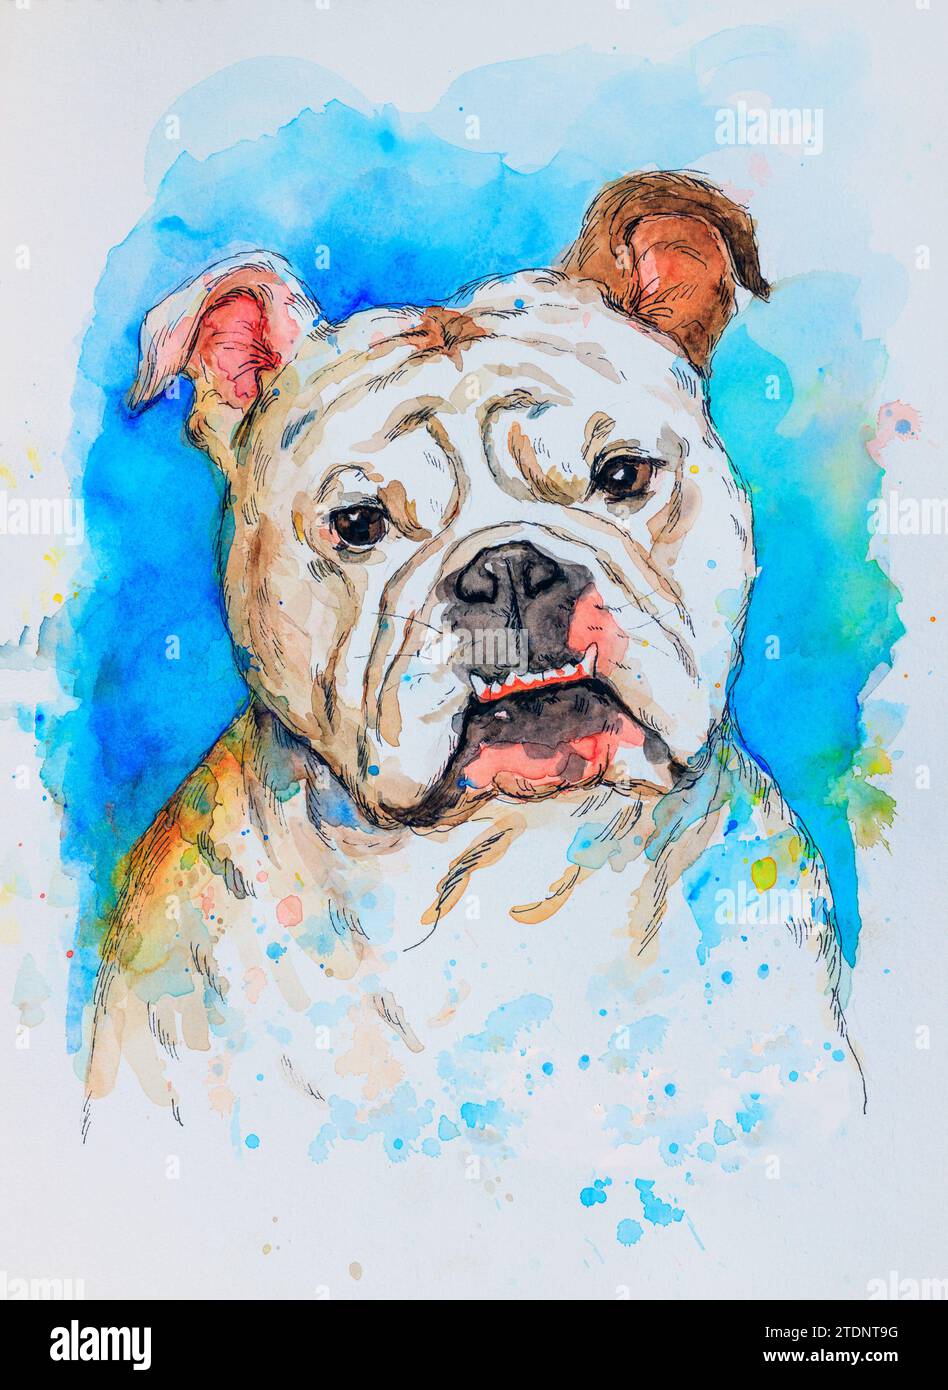 Portrait of an English Bulldog. Artistic colorful watercolor hand drawing on blue and white background. Dog pet animal concept. Stock Photo